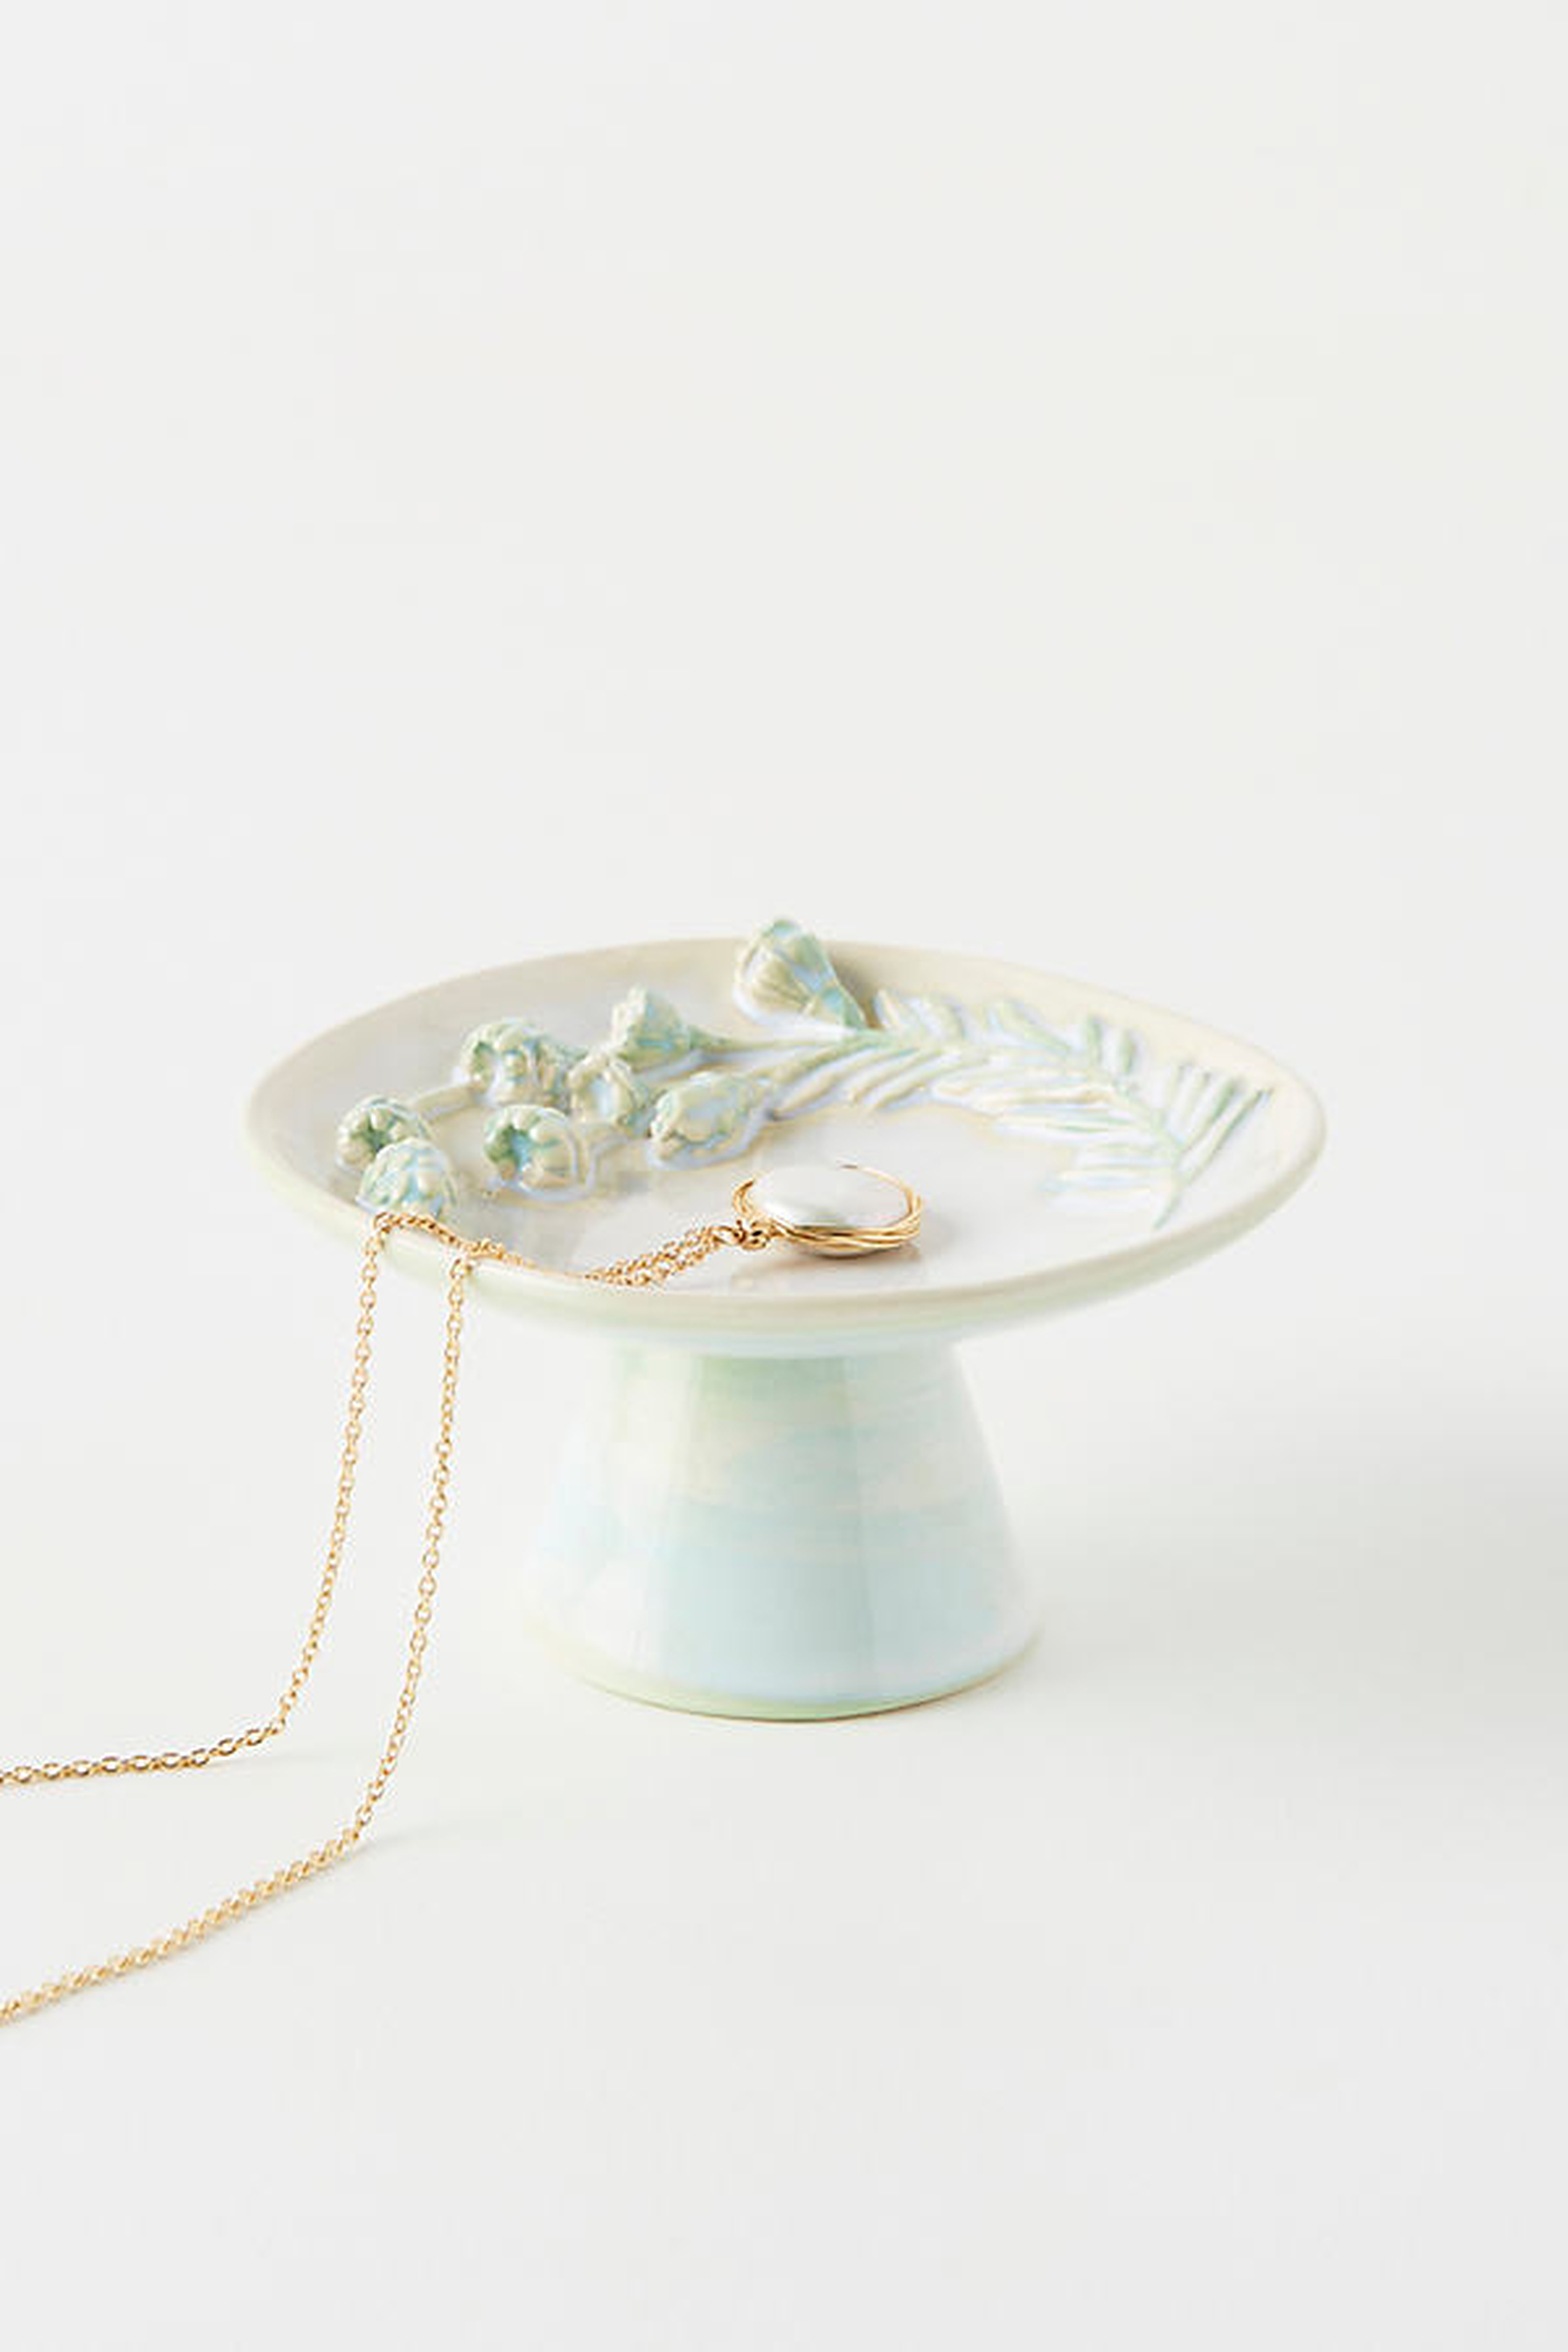 Sally Trinket Dish By Anthropologie in Green - Anthropologie